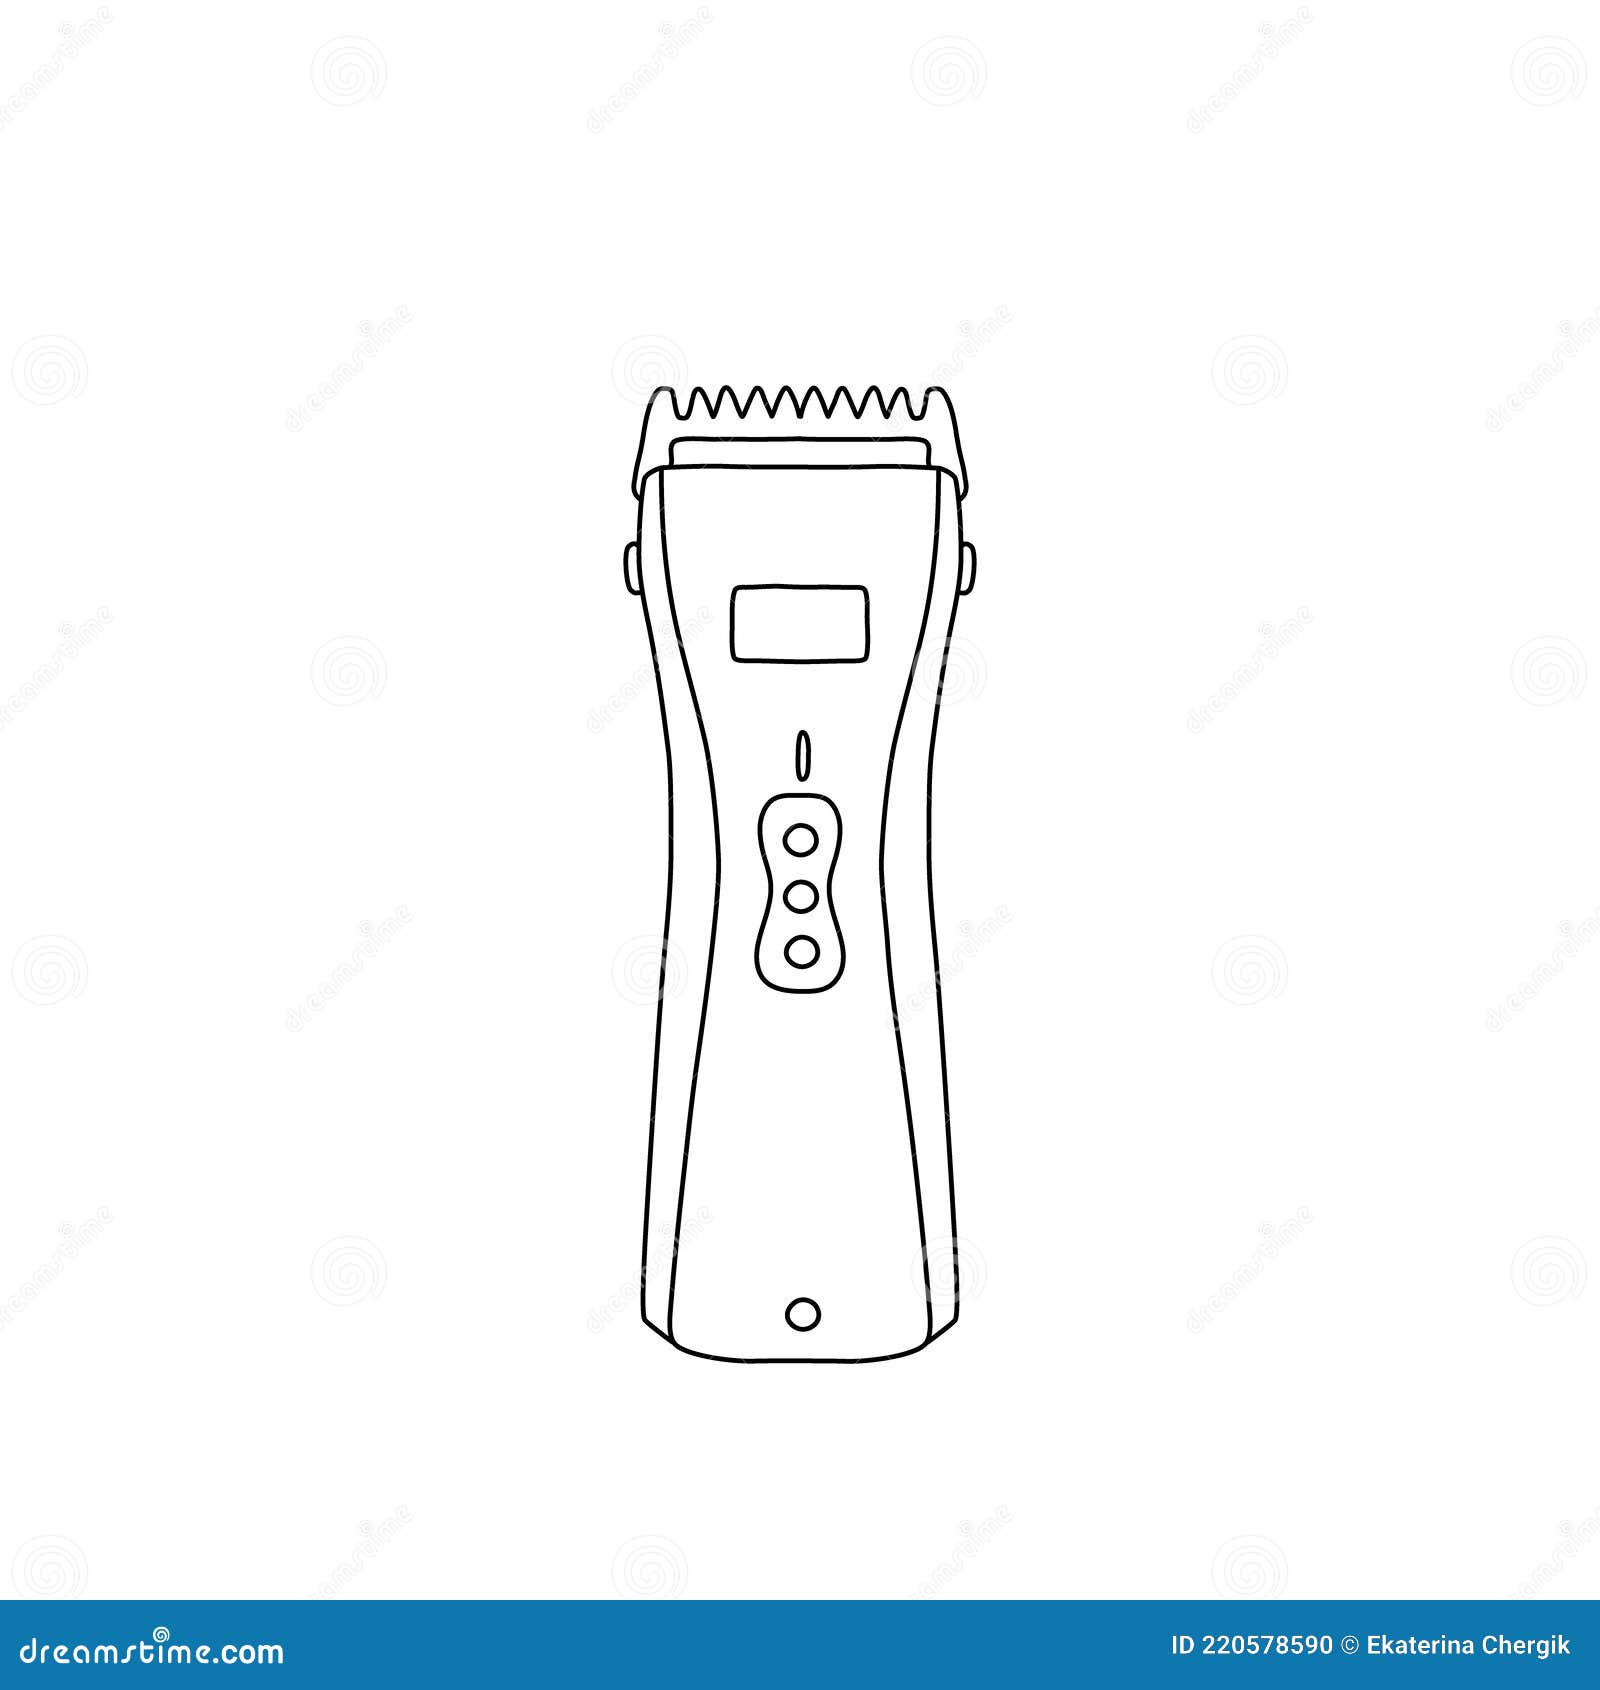 hair clippers drawing